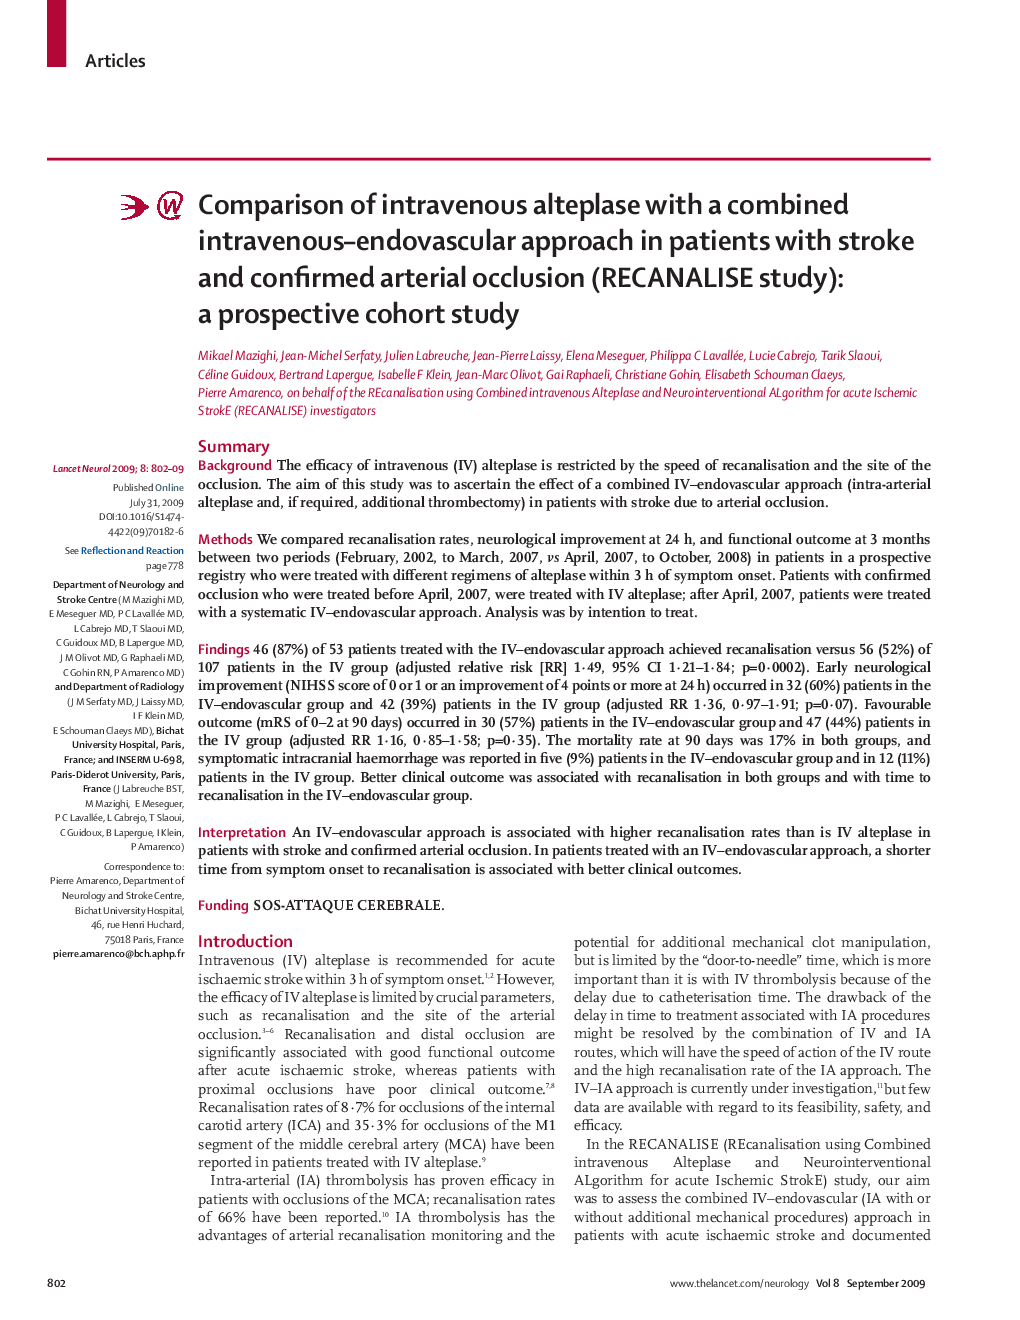 Comparison of intravenous alteplase with a combined intravenous–endovascular approach in patients with stroke and confirmed arterial occlusion (RECANALISE study): a prospective cohort study